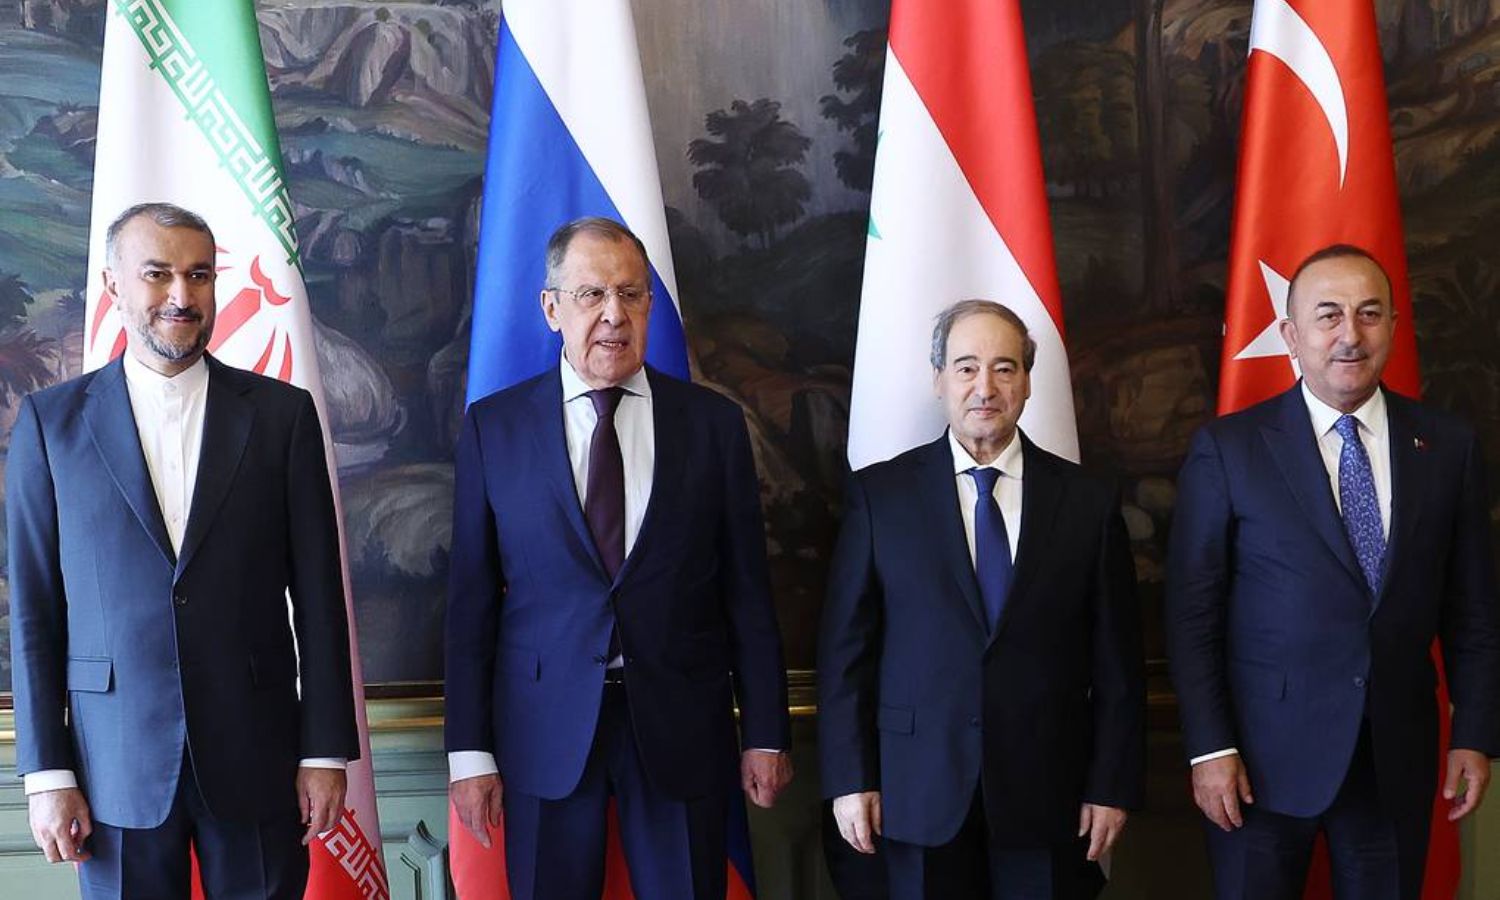 The foreign ministers of Turkey, Russia, Iran, and the Syrian regime meet in Moscow to revive relations between Ankara and the Syrian regime - May 10 (TASS)